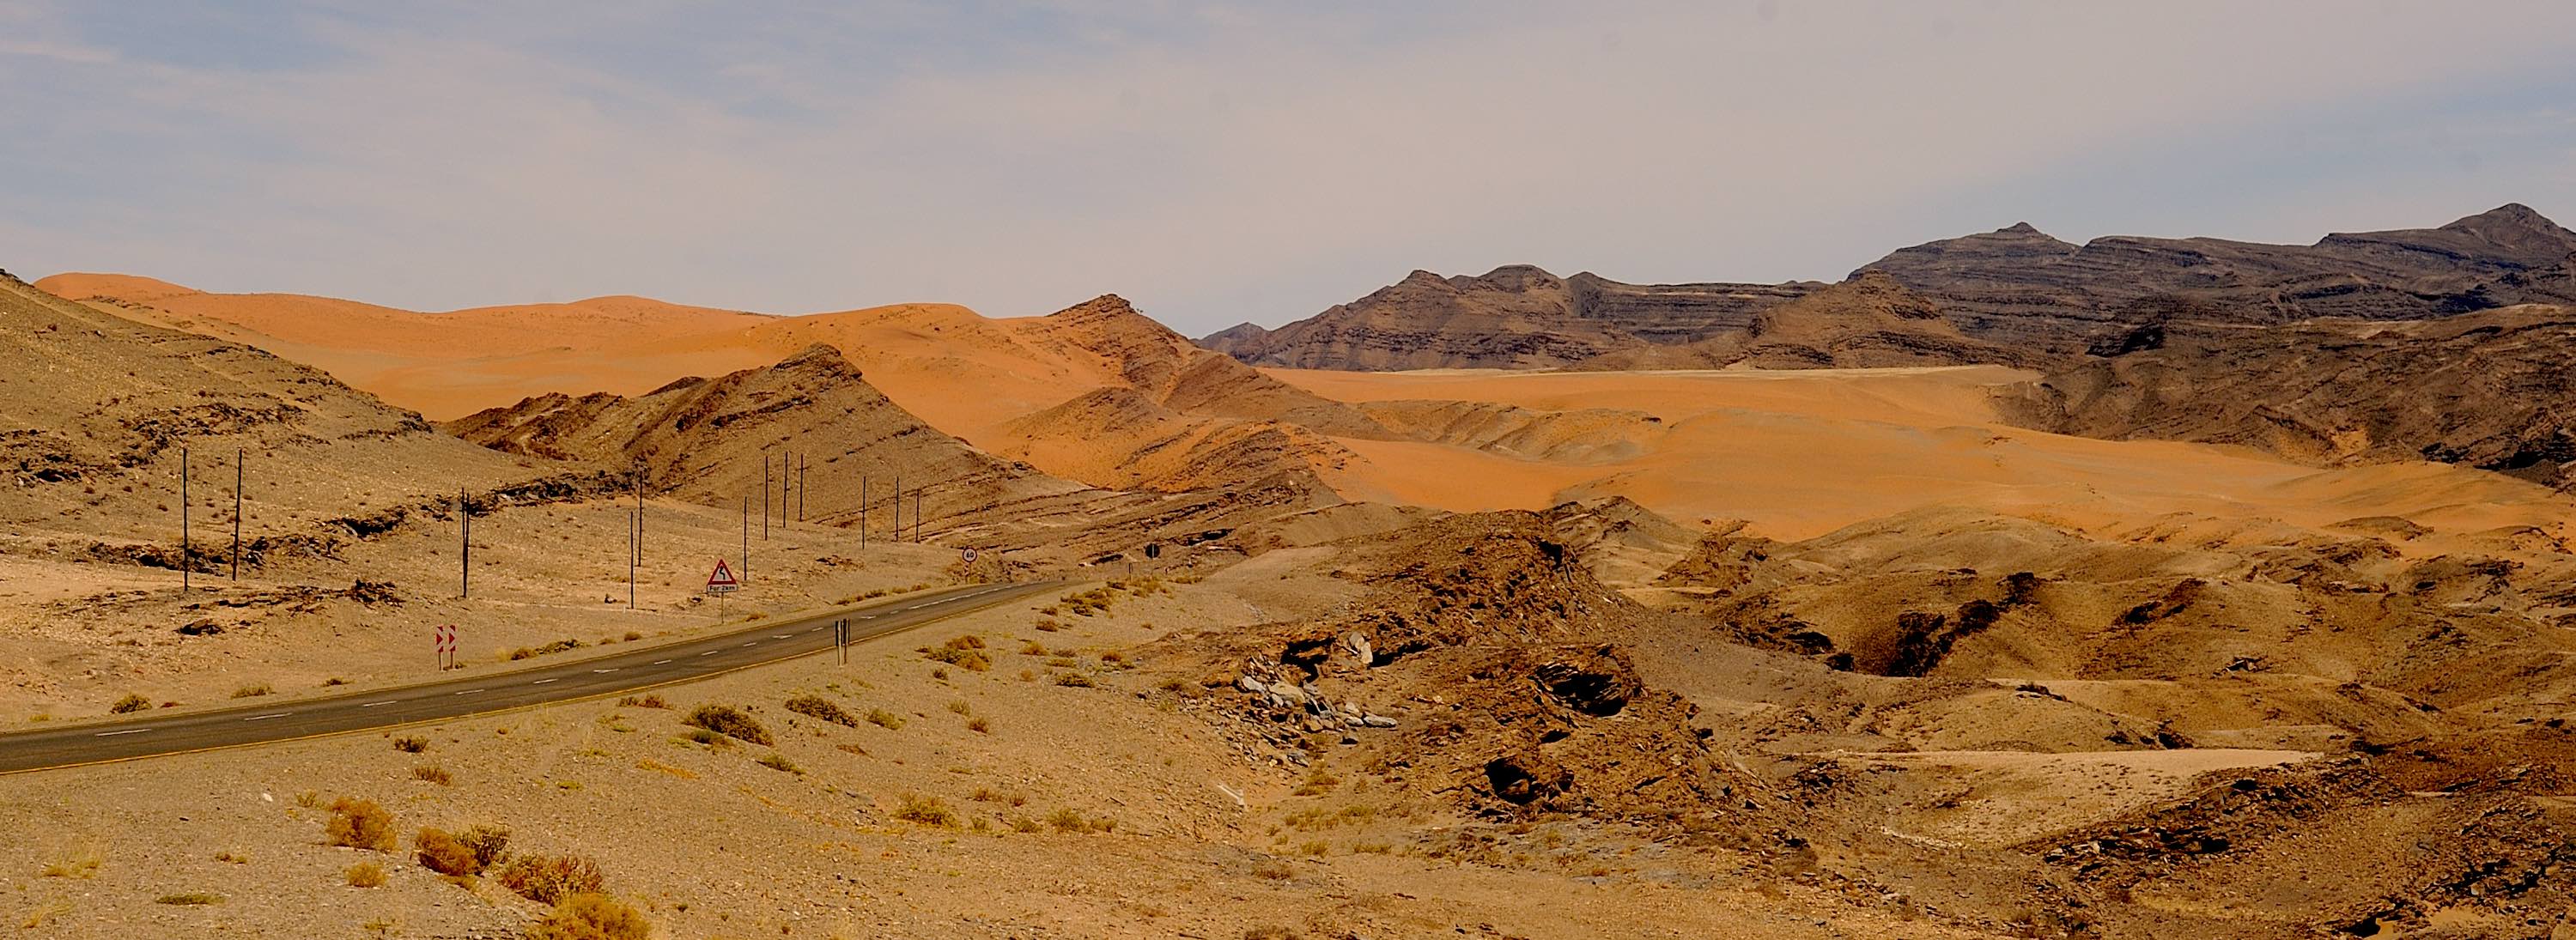 A road and pylons cut through a mountainous and desert environment..